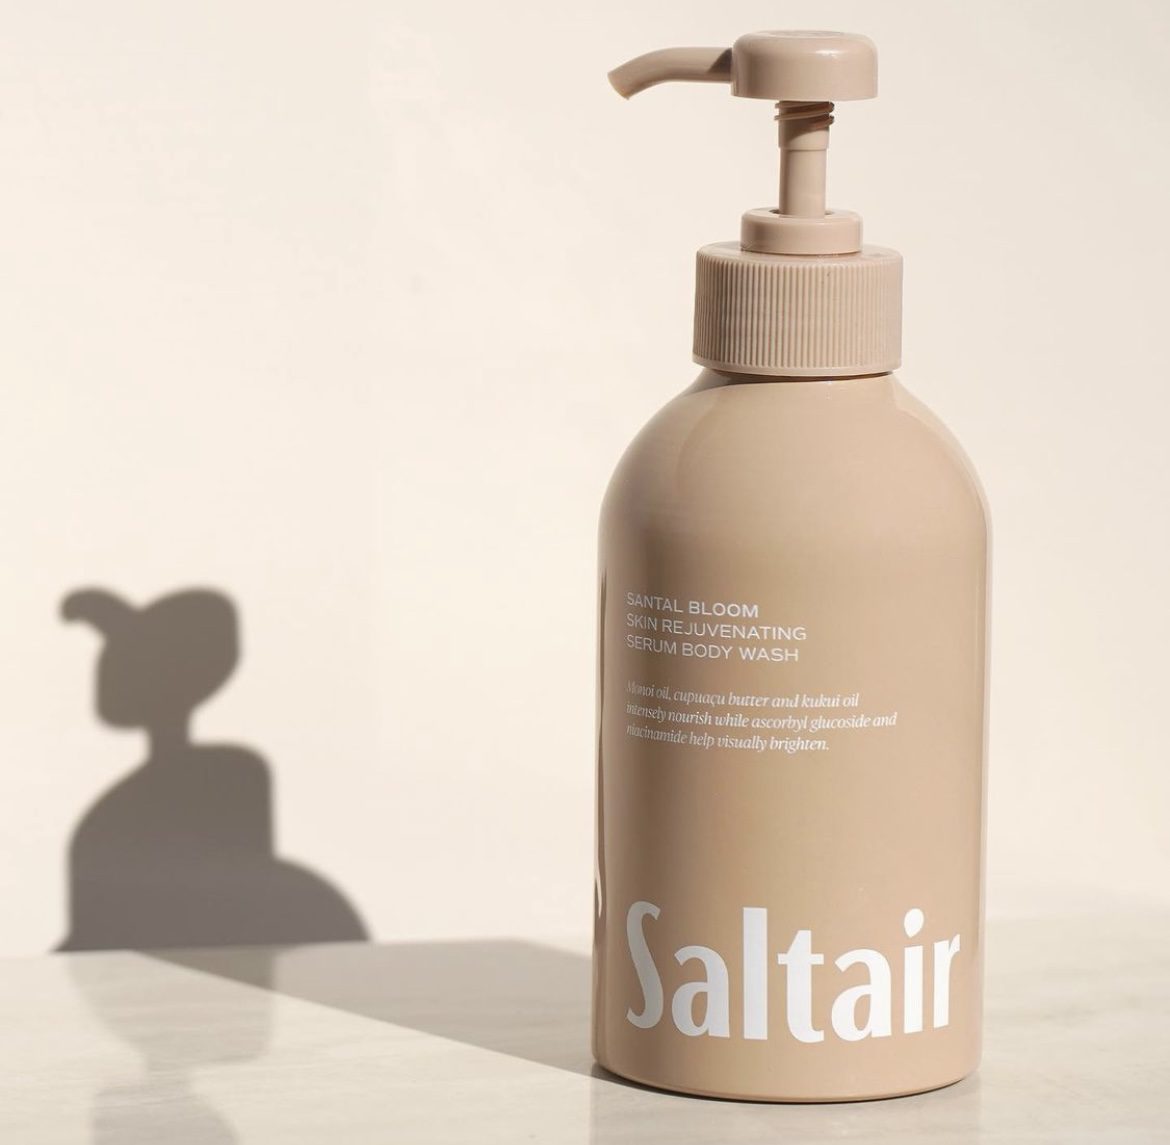 saltair body wash for Things Making Me Happy: 8.8.22